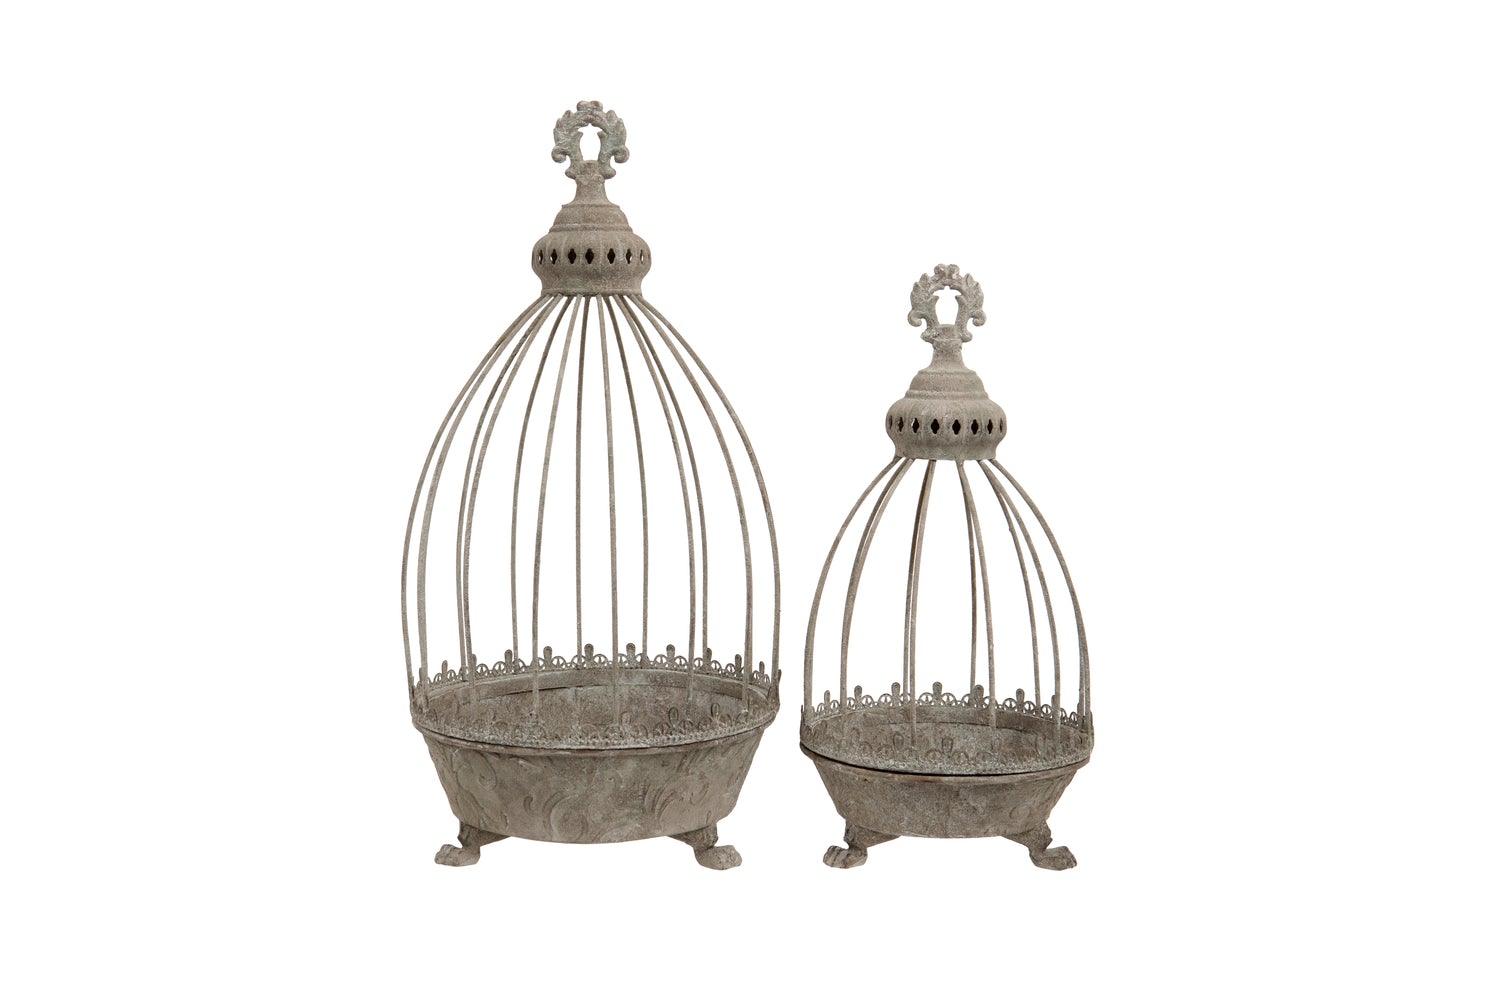 Distressed Caged Planters - 2 Sizes